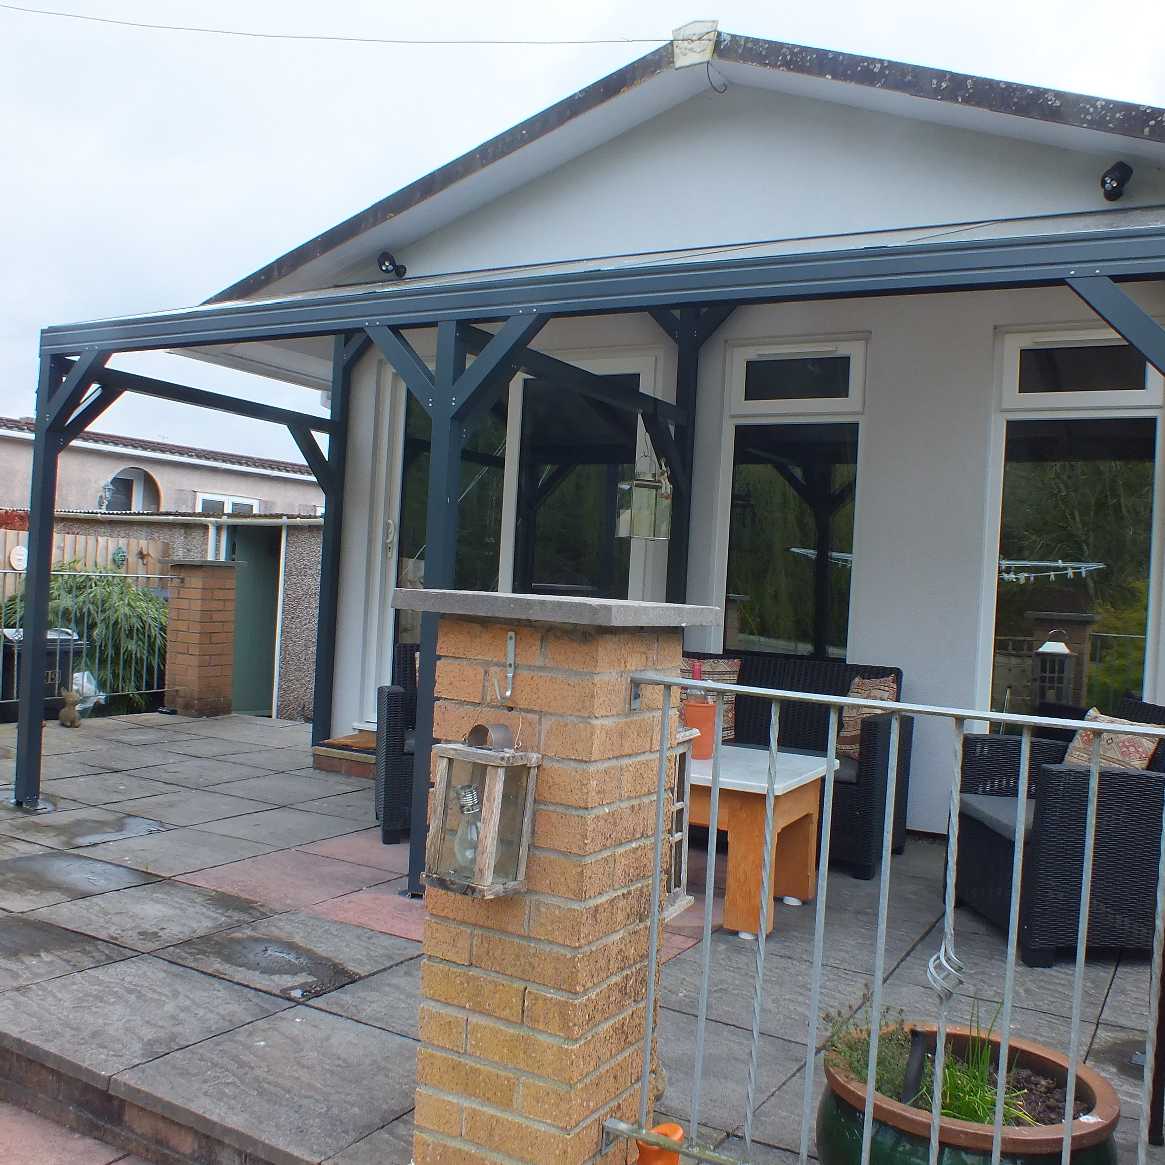 Buy Omega Smart Free-Standing,Anthracite Grey MonoPitch Roof Canopy with 16mm Polycarbonate Glazing - 4.2m (W) x 2.5m (P), (6) Supporting Posts online today